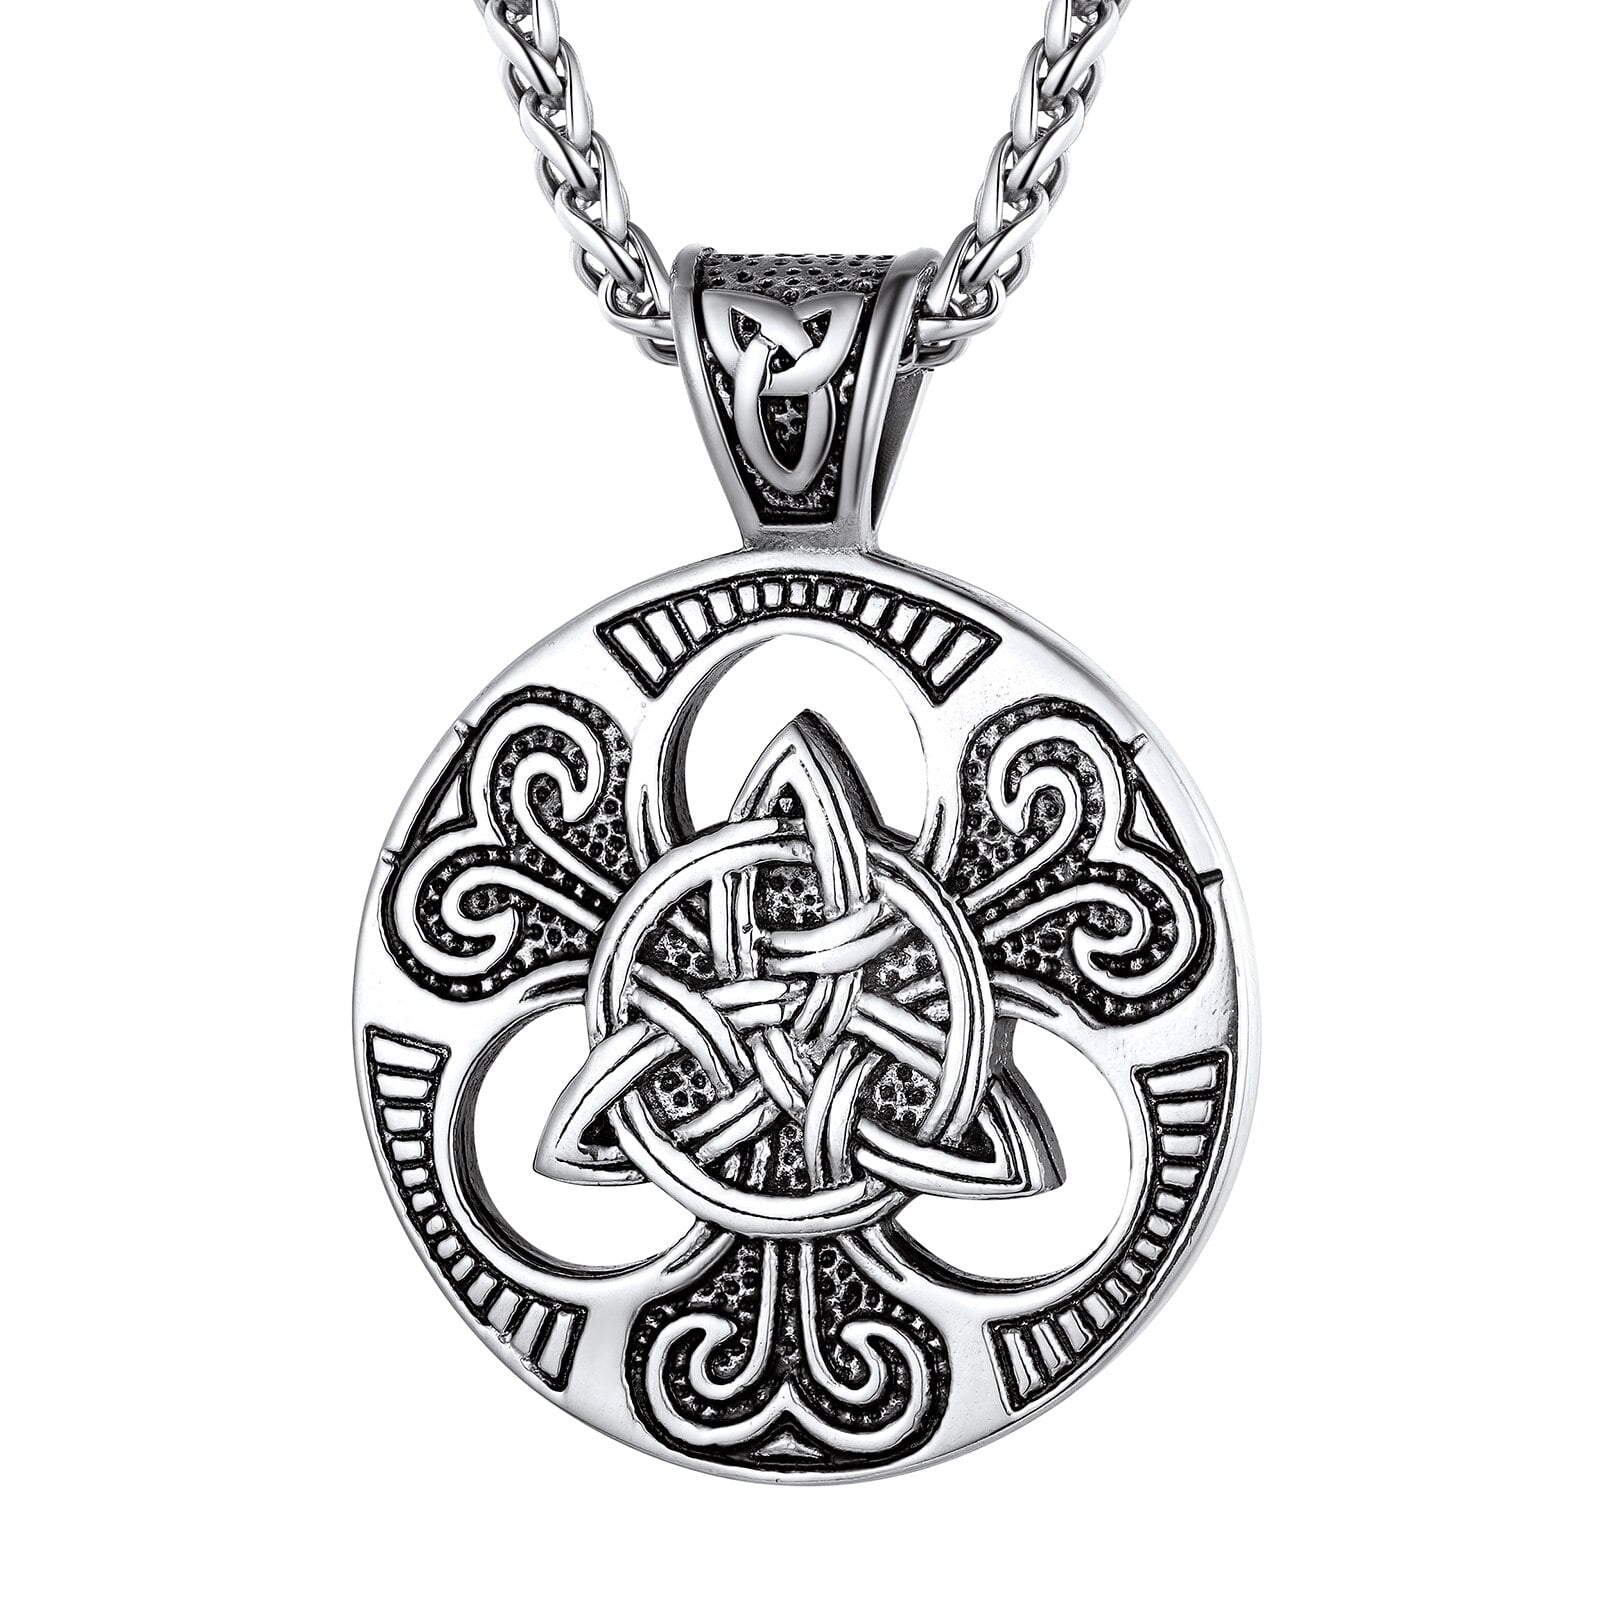 Buy Celtic Knot Viking Pendant 316L Stainless Steel Triskelion Protection  Necklace Black Gun Plated Mens Amulet Jewelry SP0053B at Amazon.in